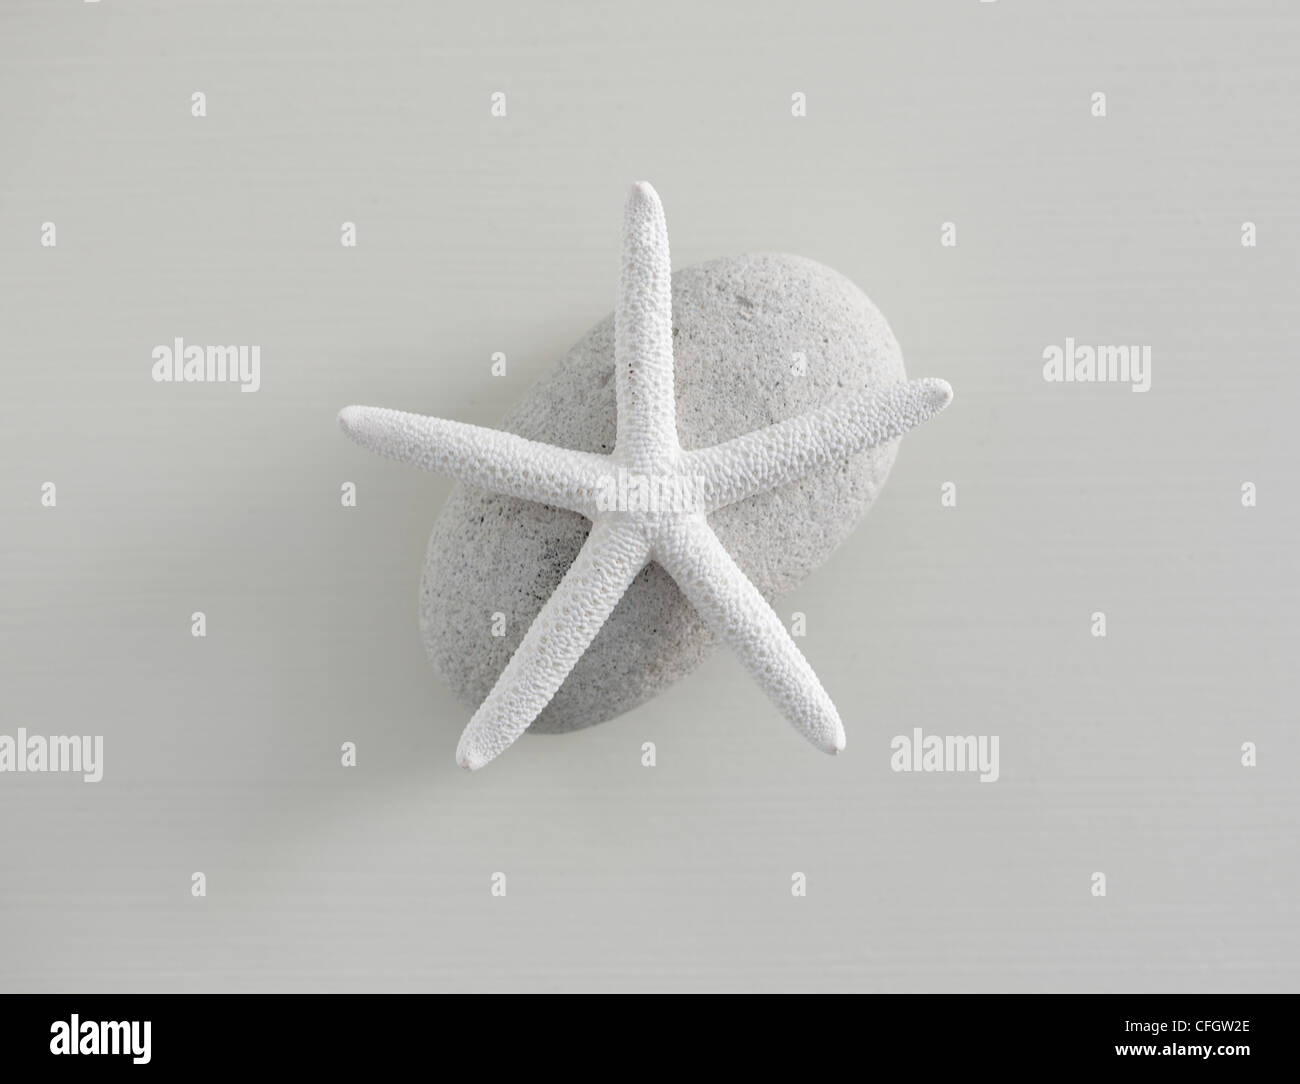 Starfish on Rock Banque D'Images